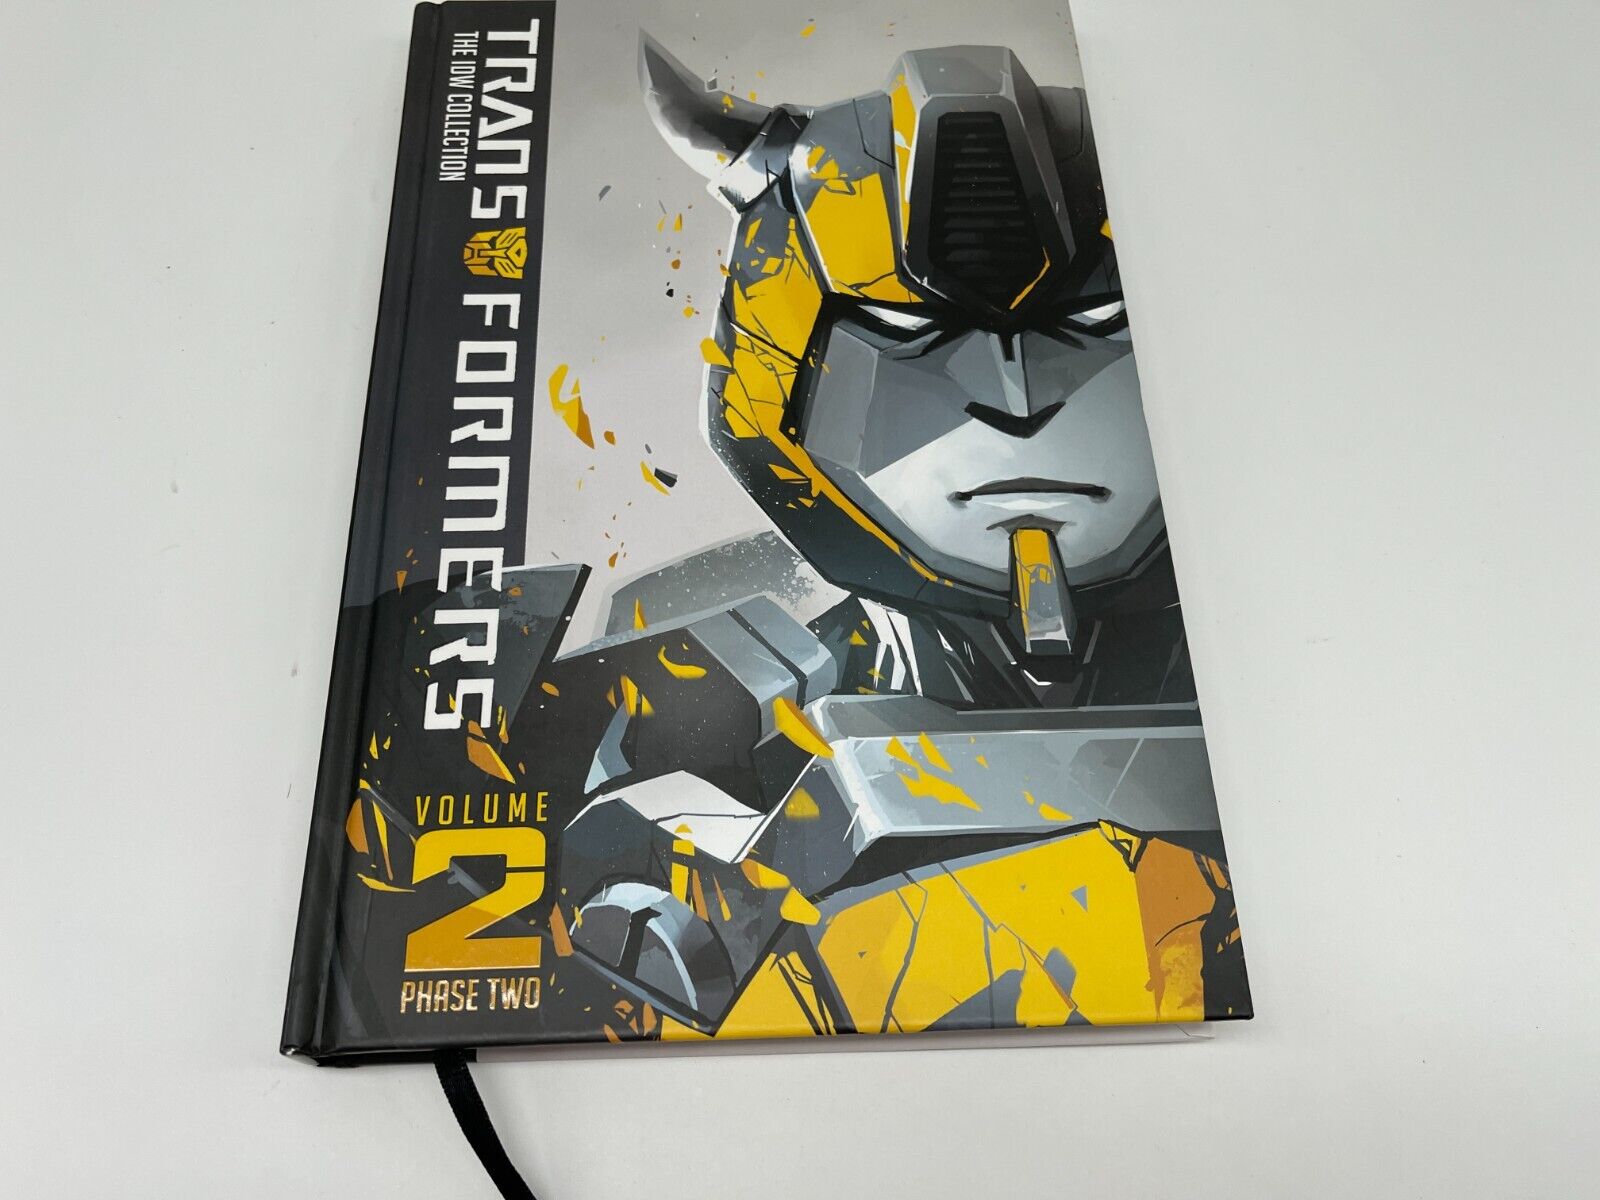 Transformers The IDW Collection Phase 2 Volume 2 Hardcover HC